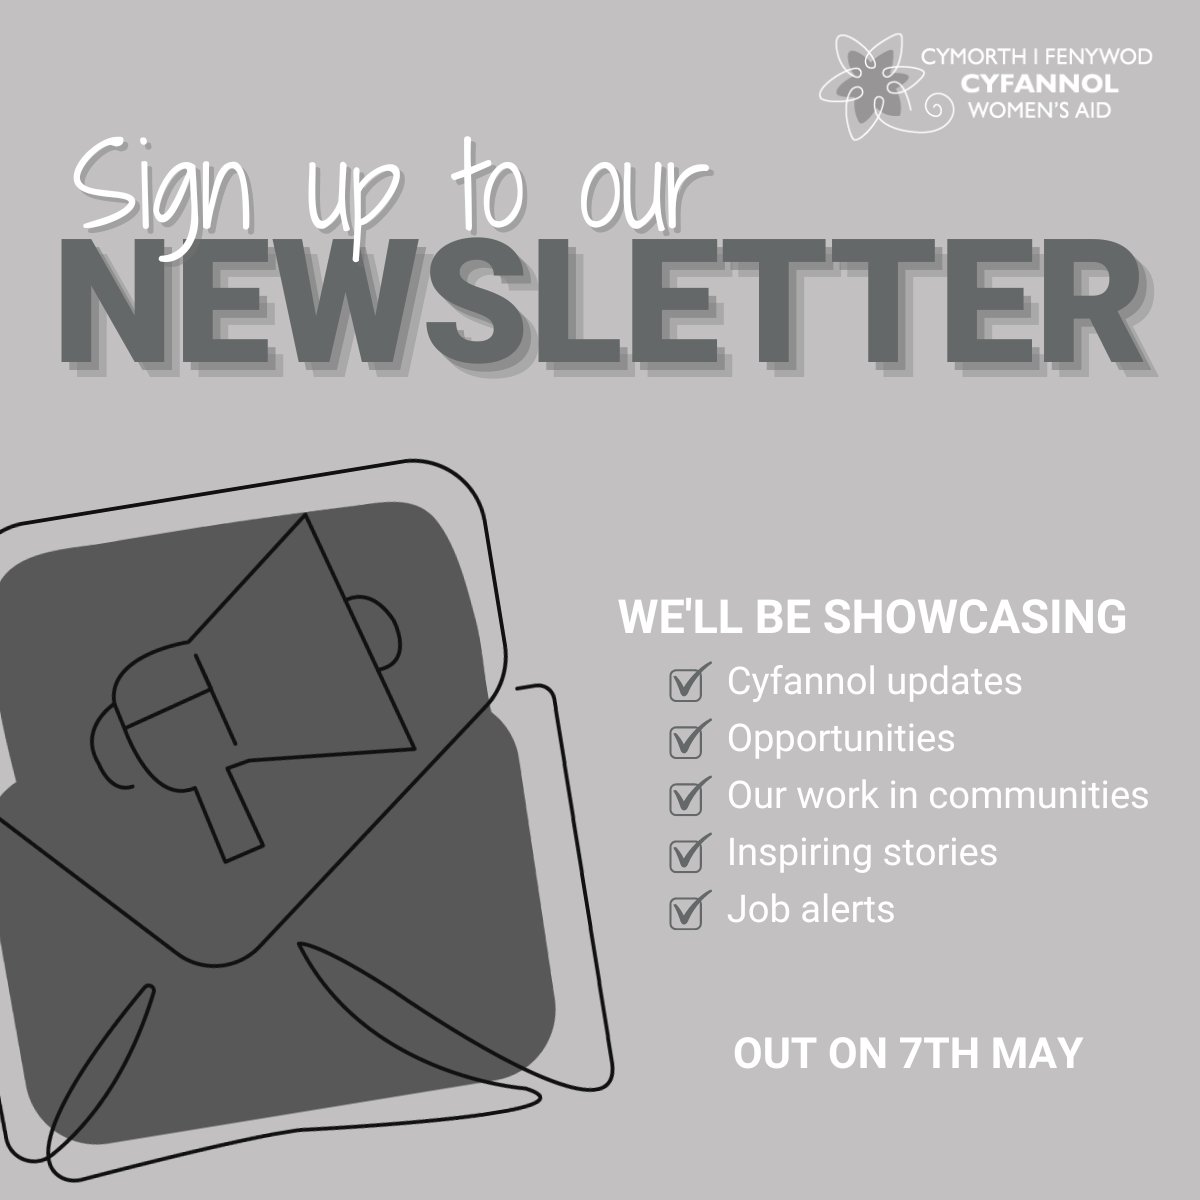 Our May newsletter is scheduled to be released on Tuesday, 7th May. Sign up now if you want to stay up to date on the latest Cyfannol news and insights! 📩 Sign up via eepurl.com/hKaXAX